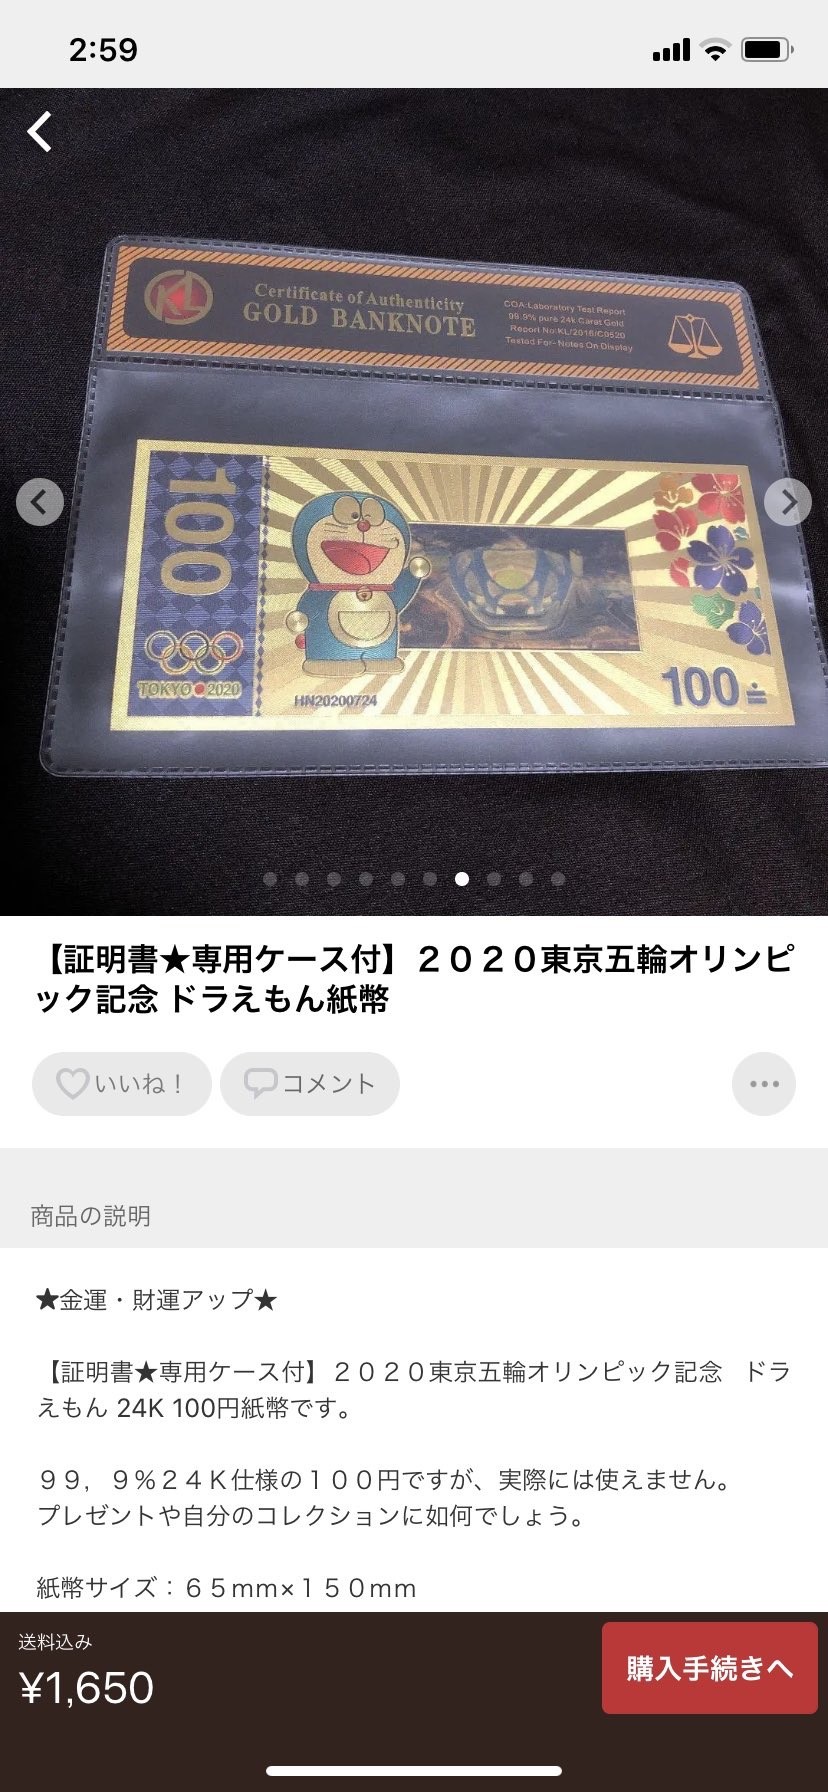 [Sad news] Doraemon will be used for fake Olympic banknotes that are too smelly